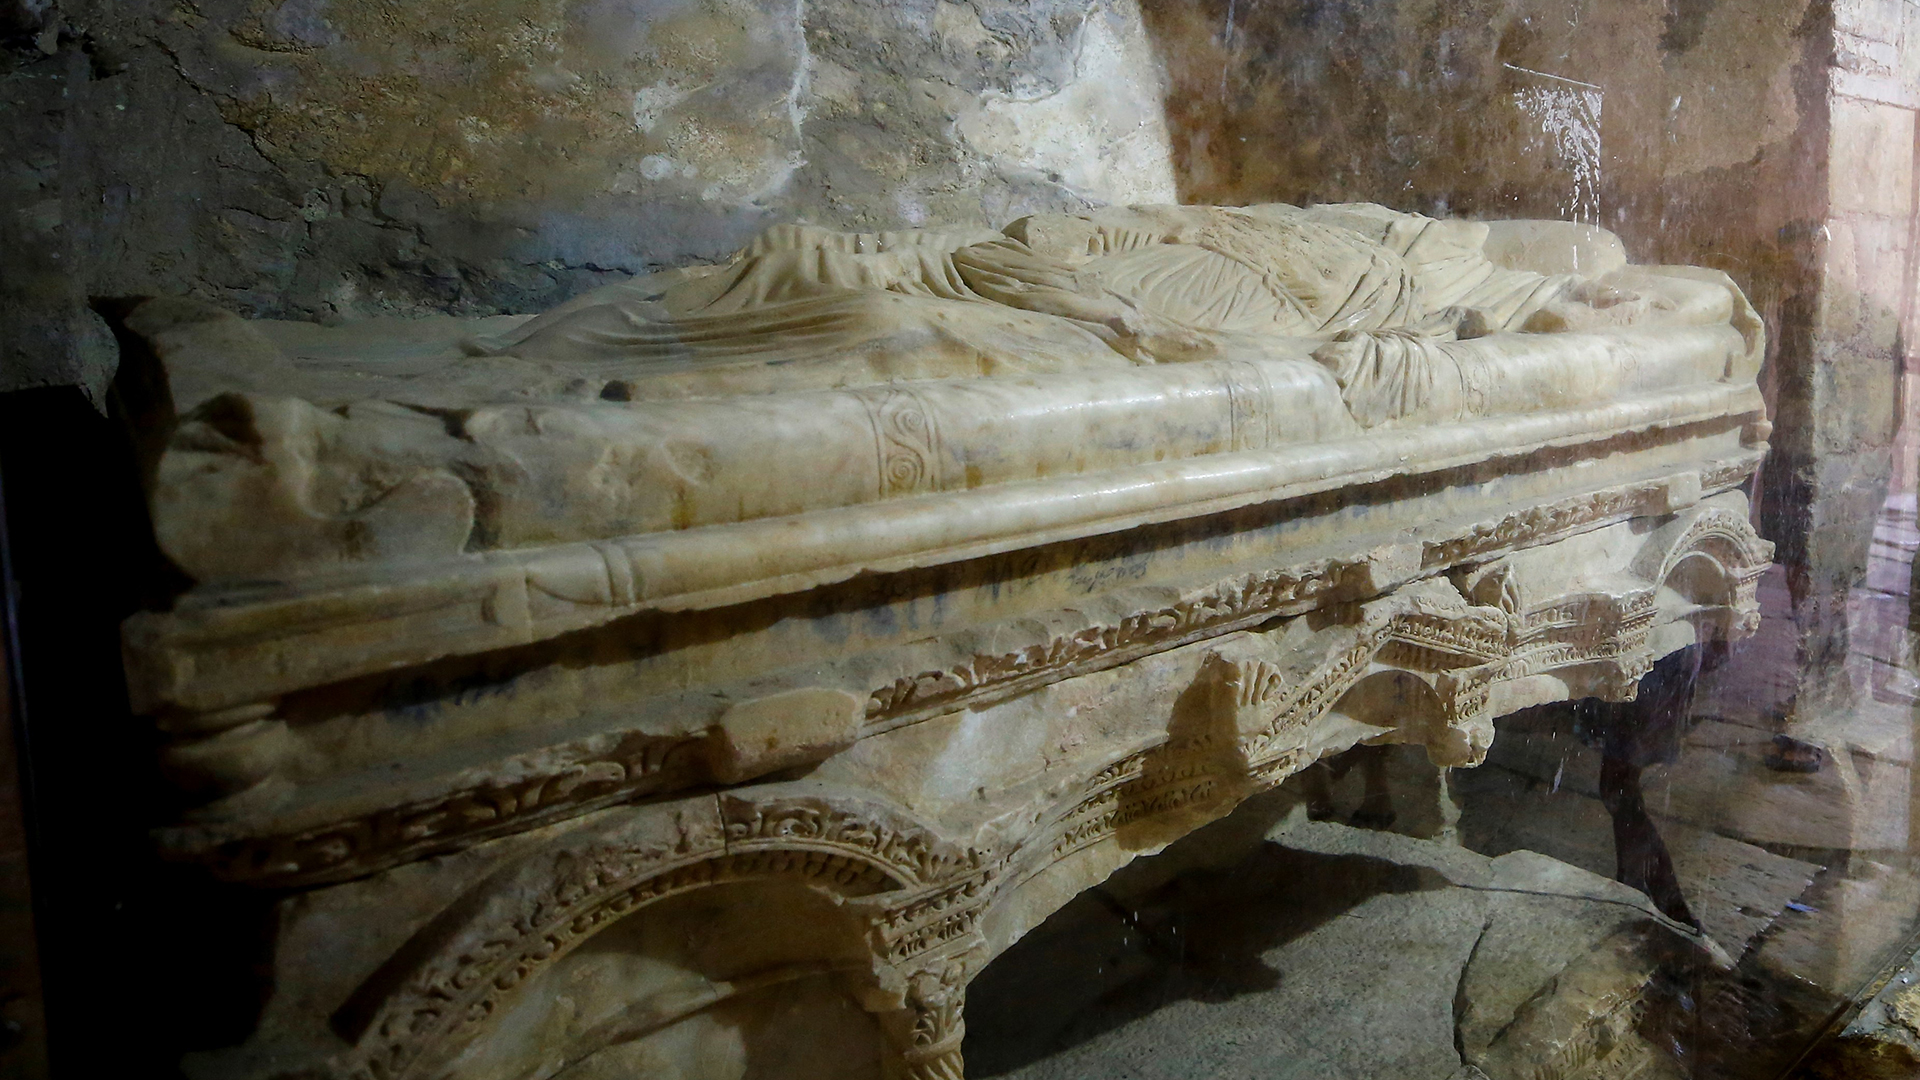 The sarcophagus of Saint Nicholas is located in a church named after the saint in the down of Demre, Turkey.